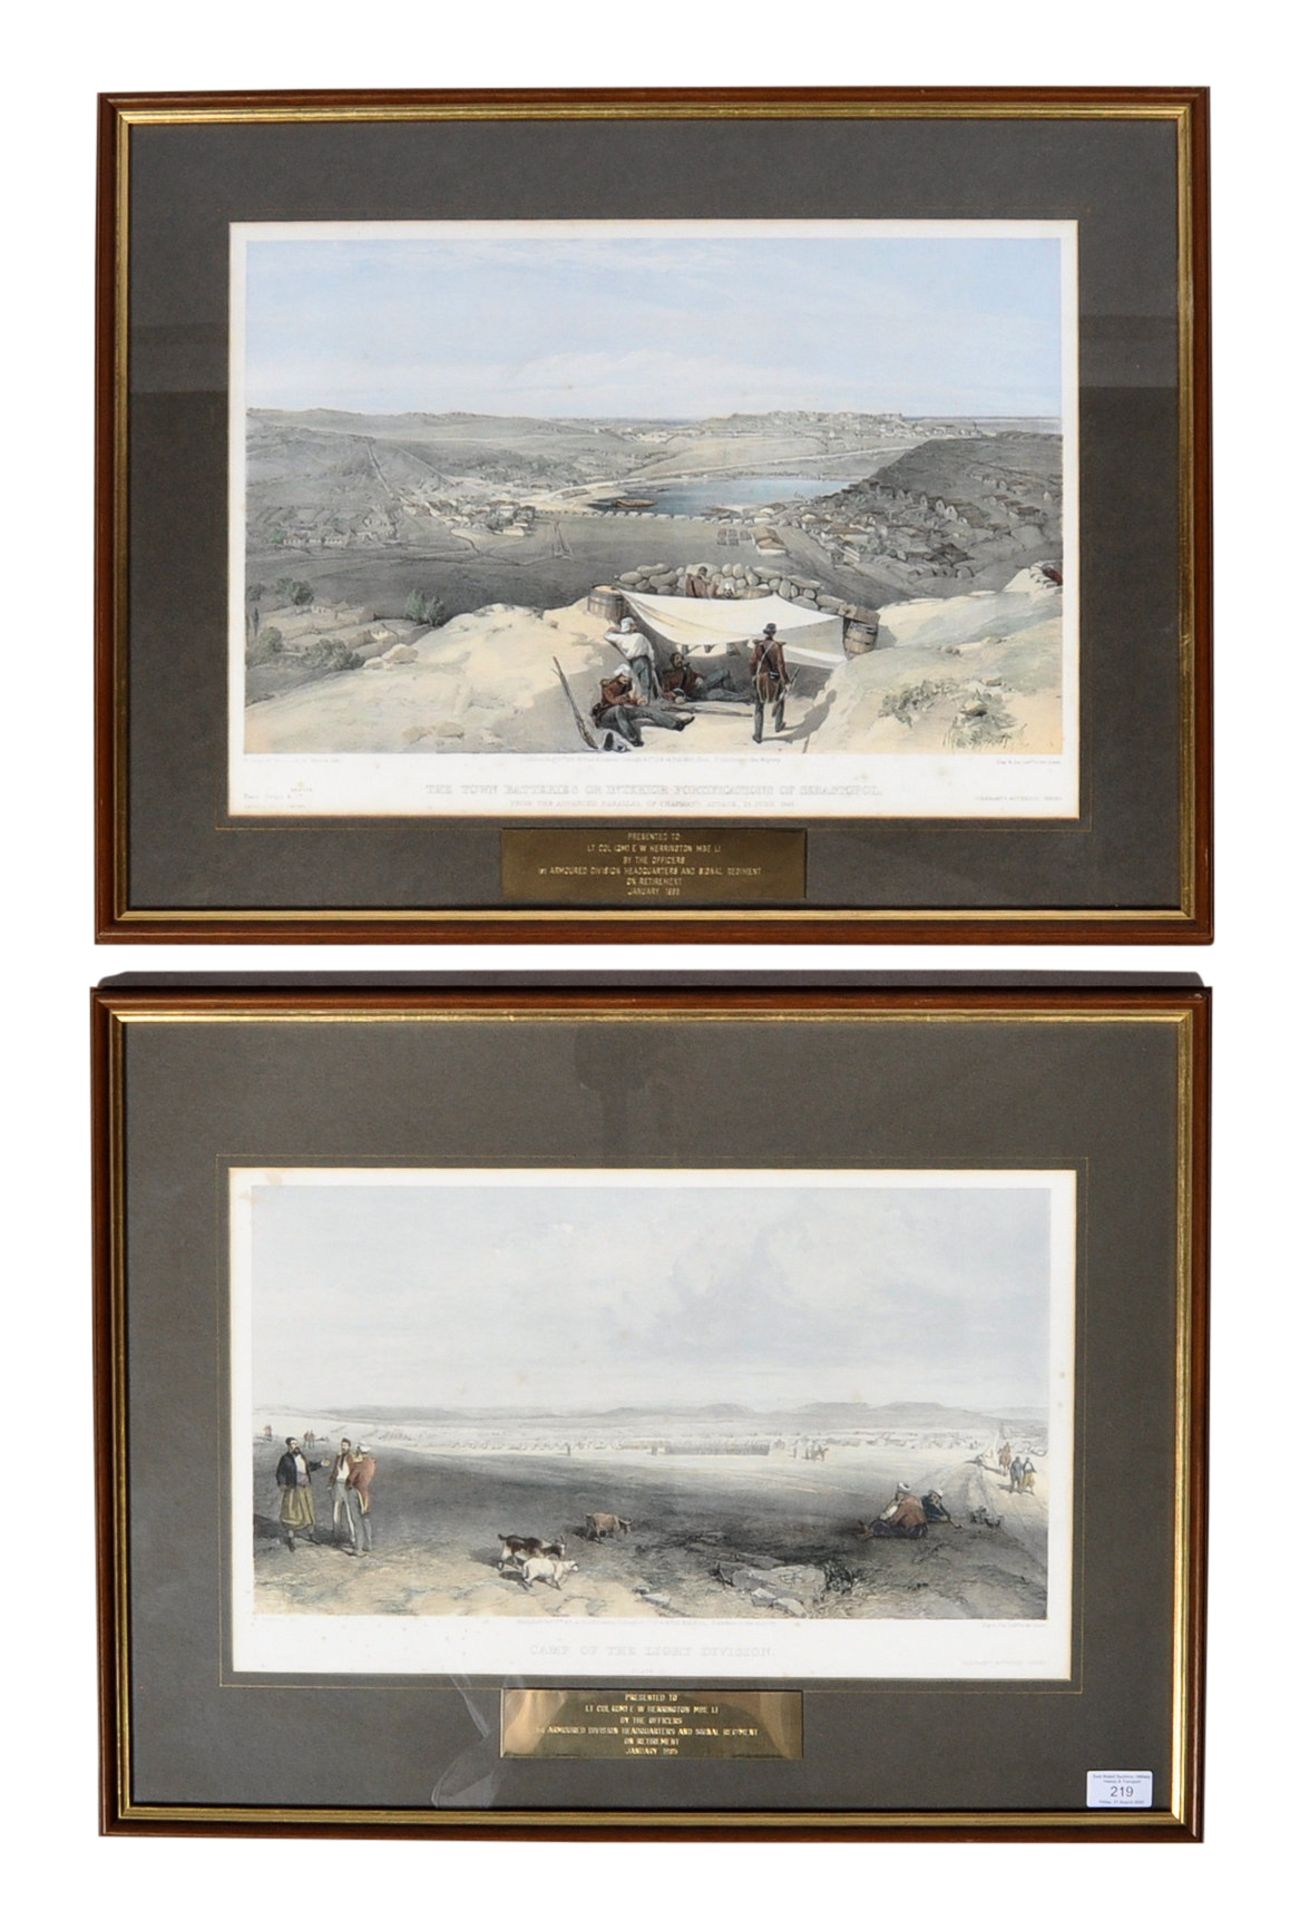 COLLECTION OF EW HERRINGTON - TWO 19TH CENTURY FRAMED PRINTS